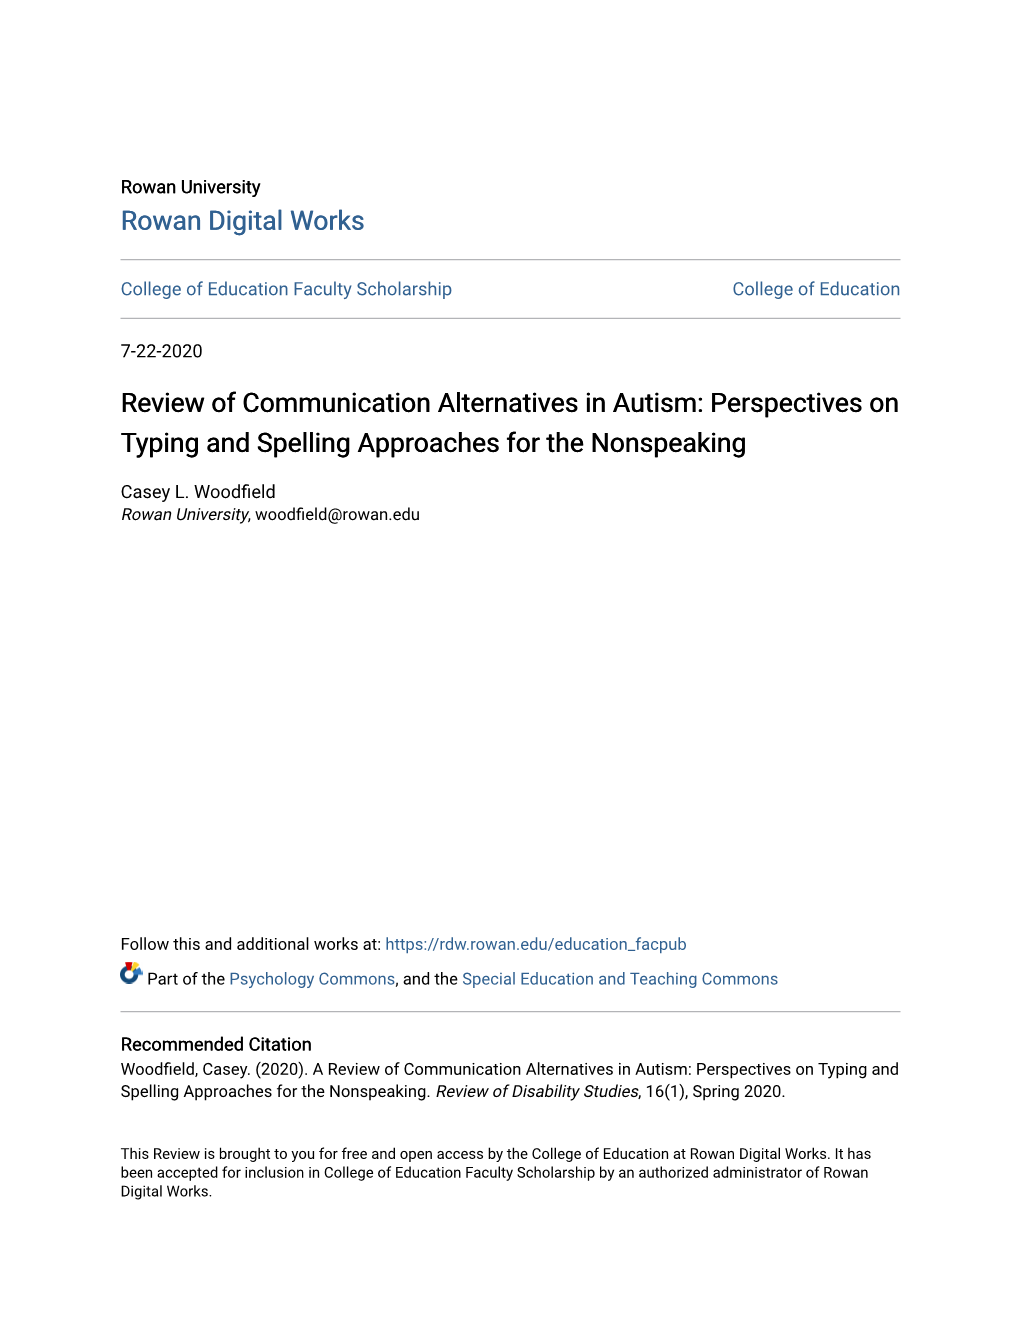 Review of Communication Alternatives in Autism: Perspectives on Typing and Spelling Approaches for the Nonspeaking